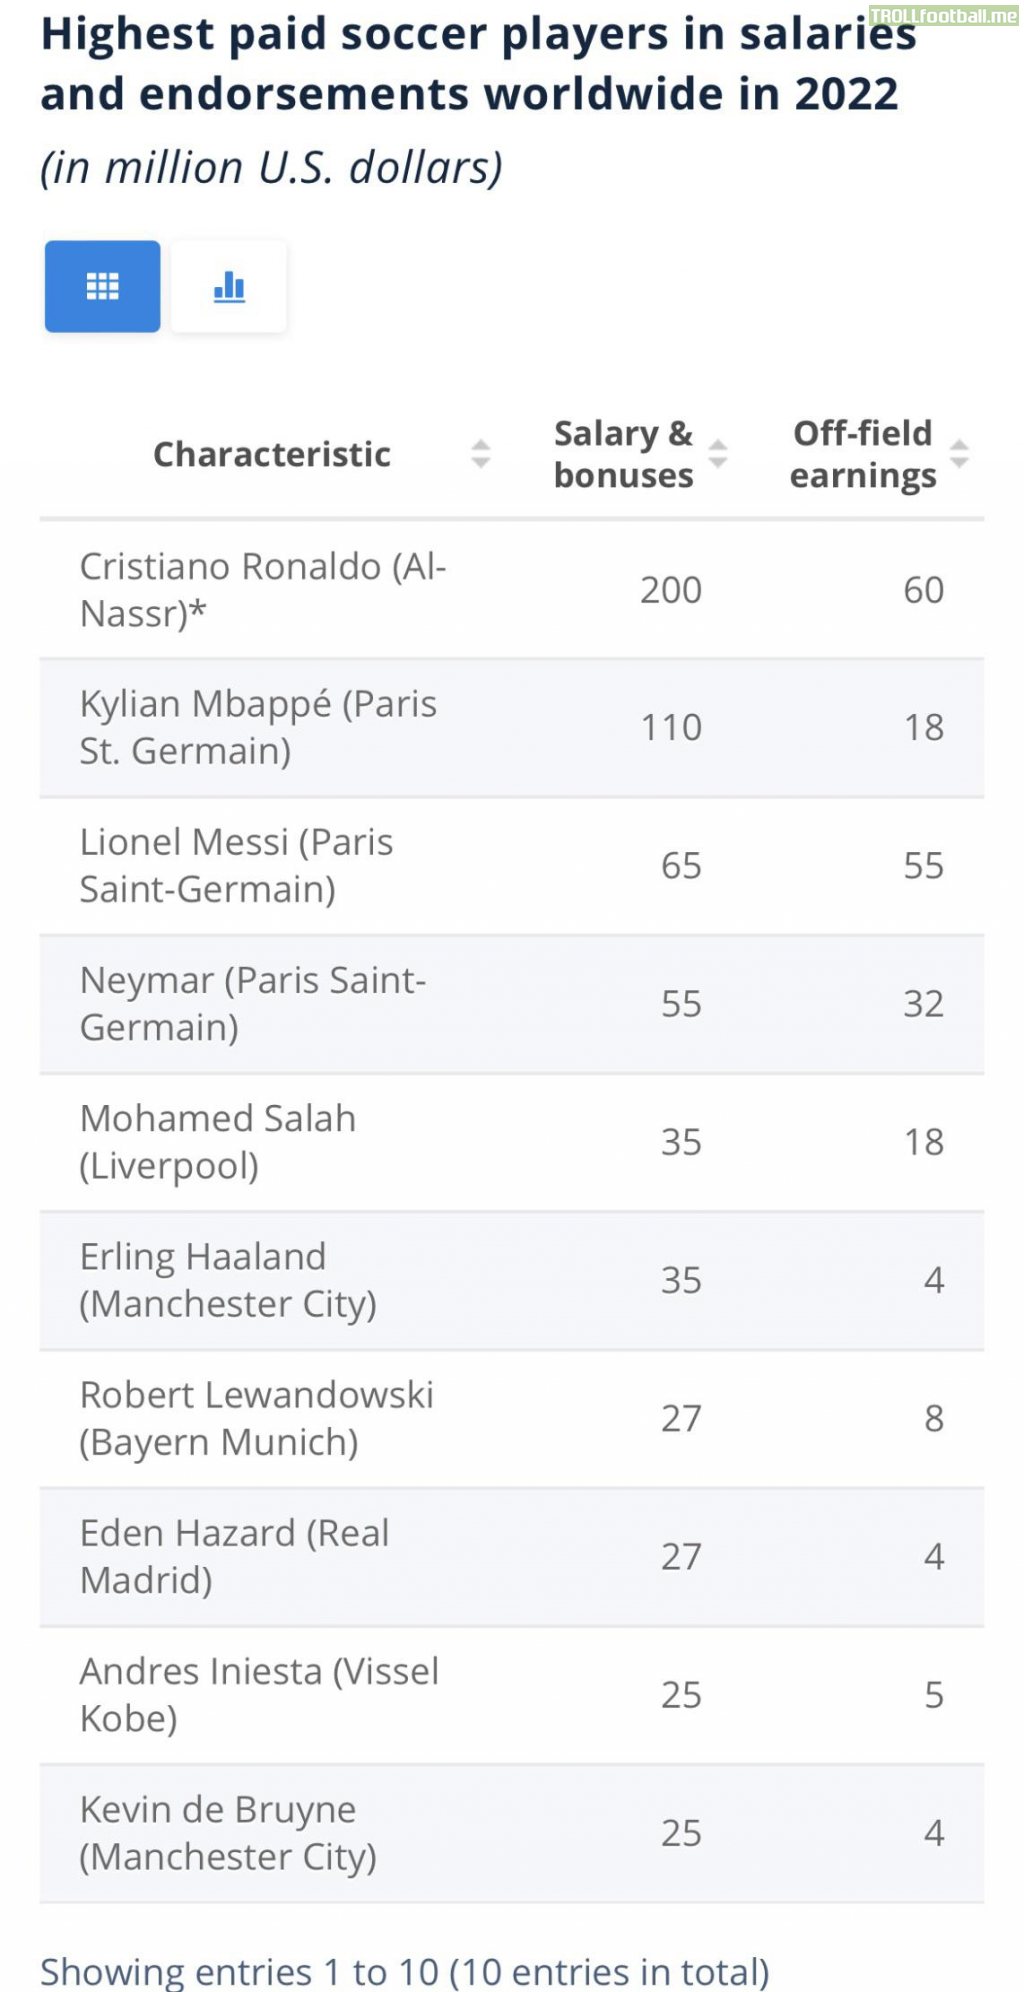 Highest paid football players in yearly salaries and endorsements.